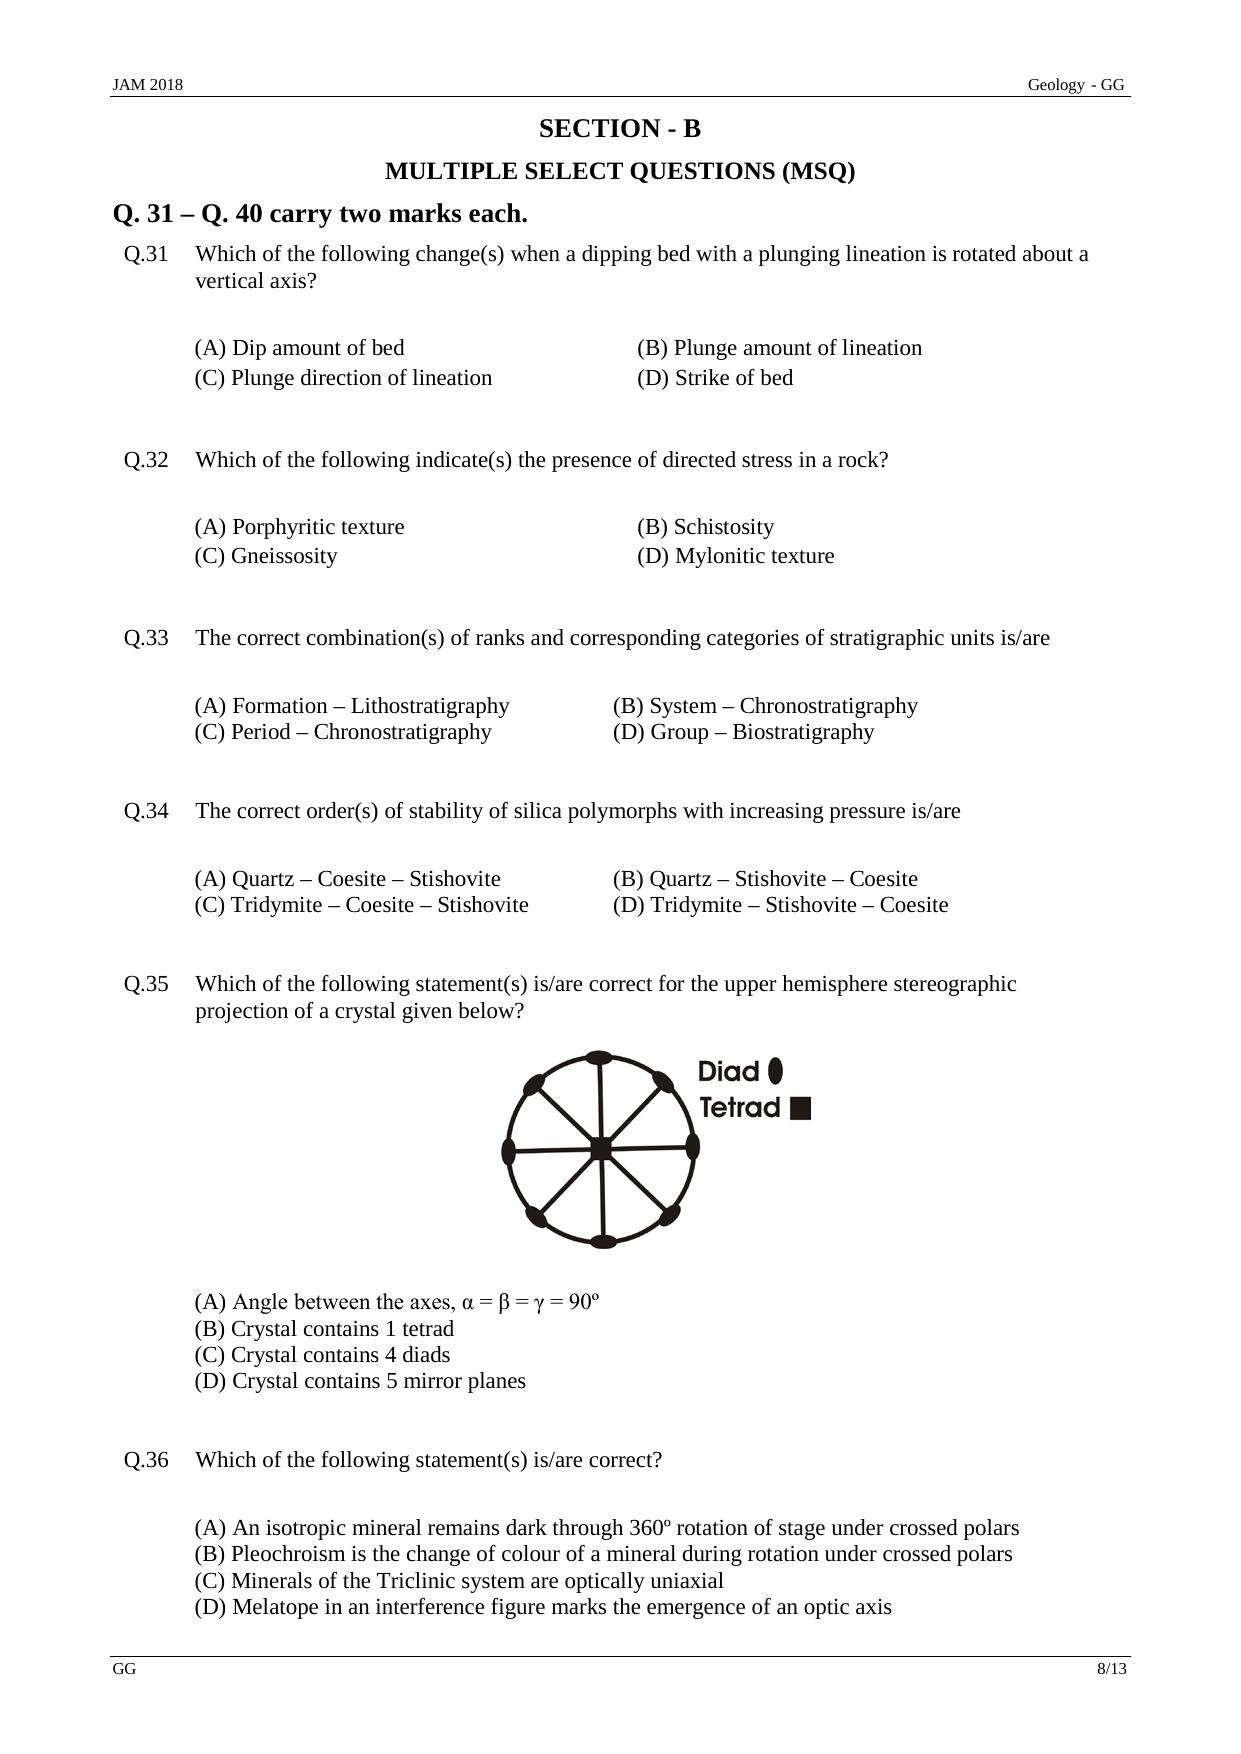 JAM 2018: GG Question Paper - Page 8